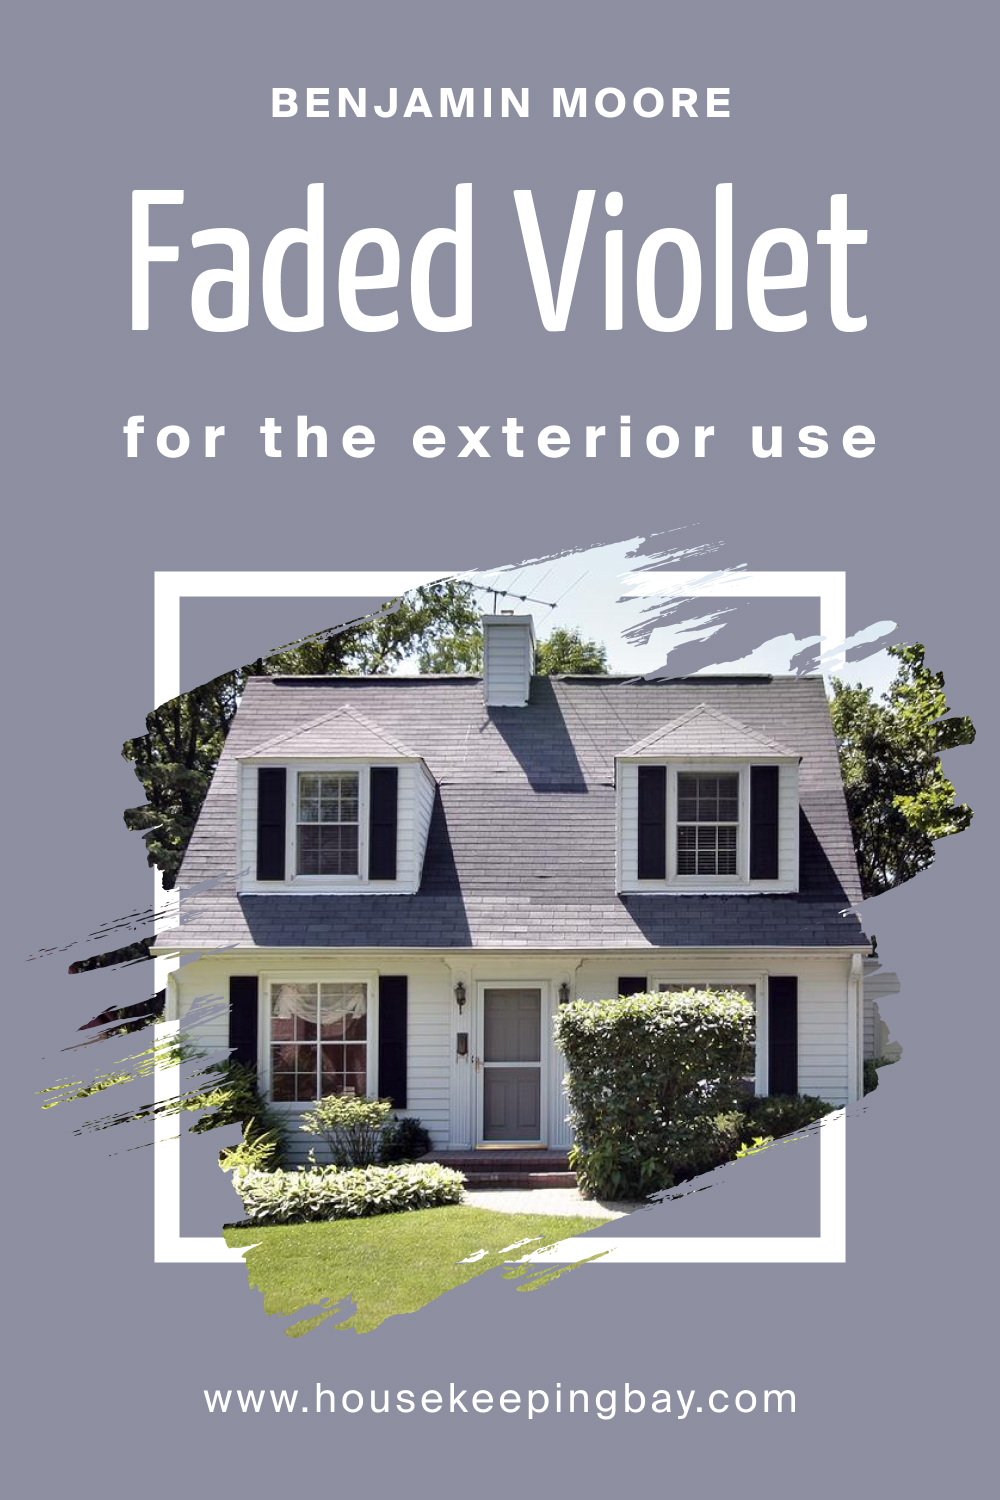 How to Use Faded Violet CSP-455 for an Exterior?